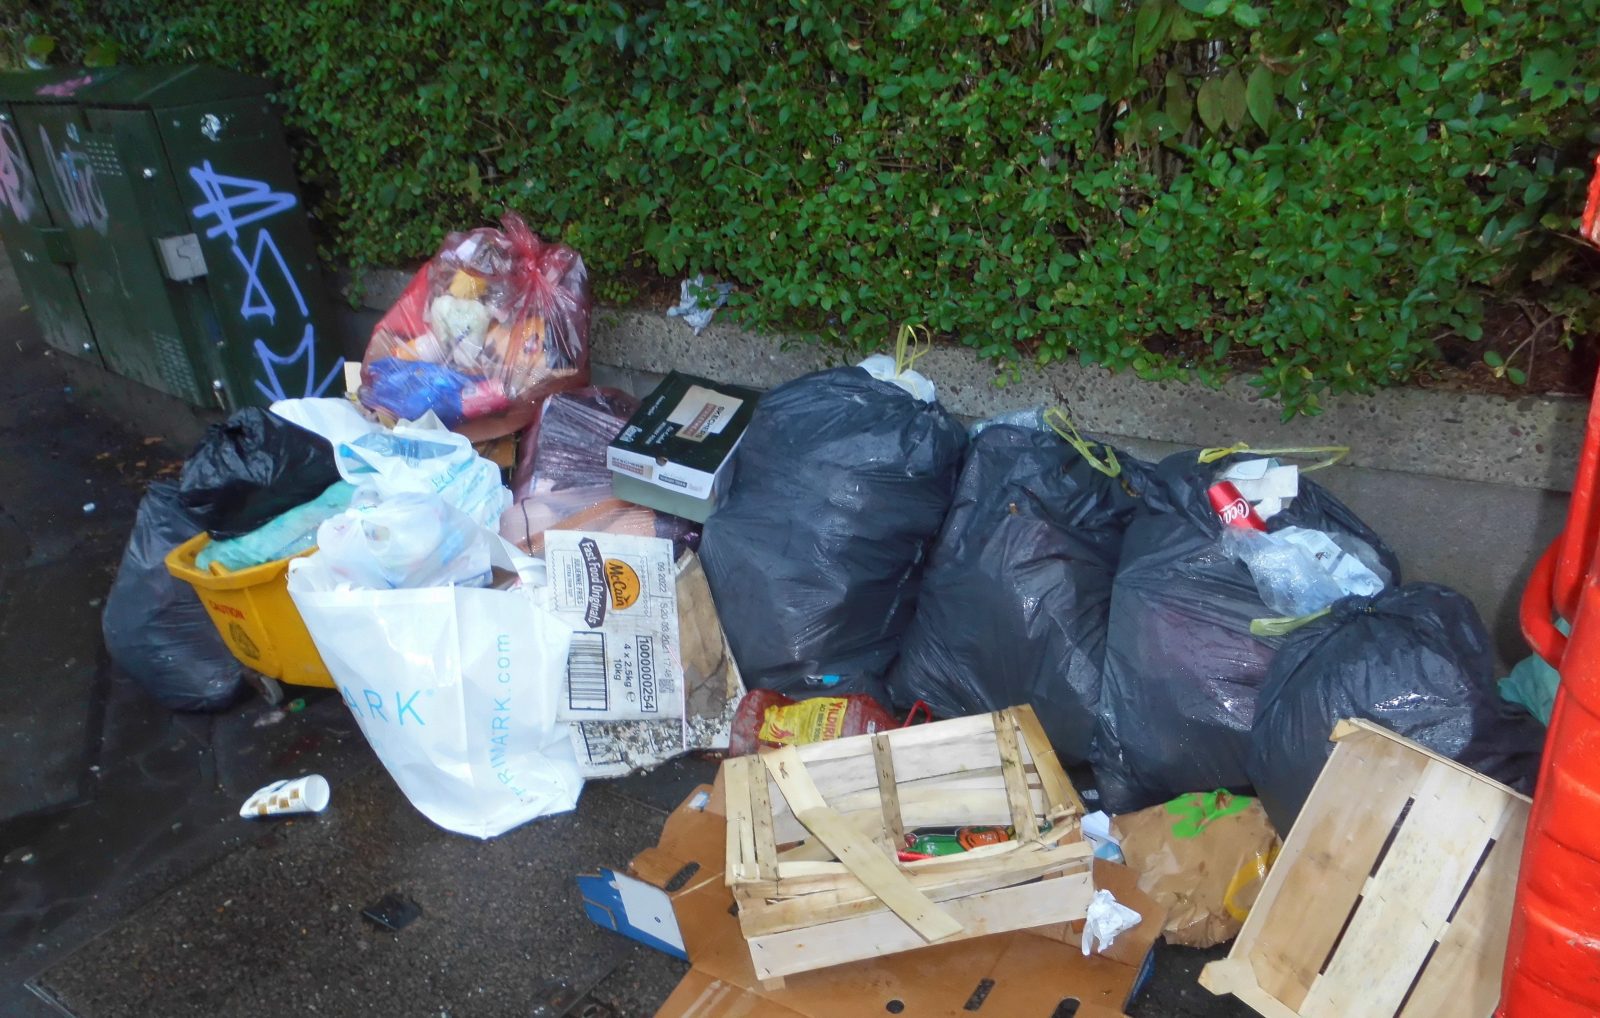 Manchester dessert and burger bar fined for dumping rubbish in Rusholme, The Manc